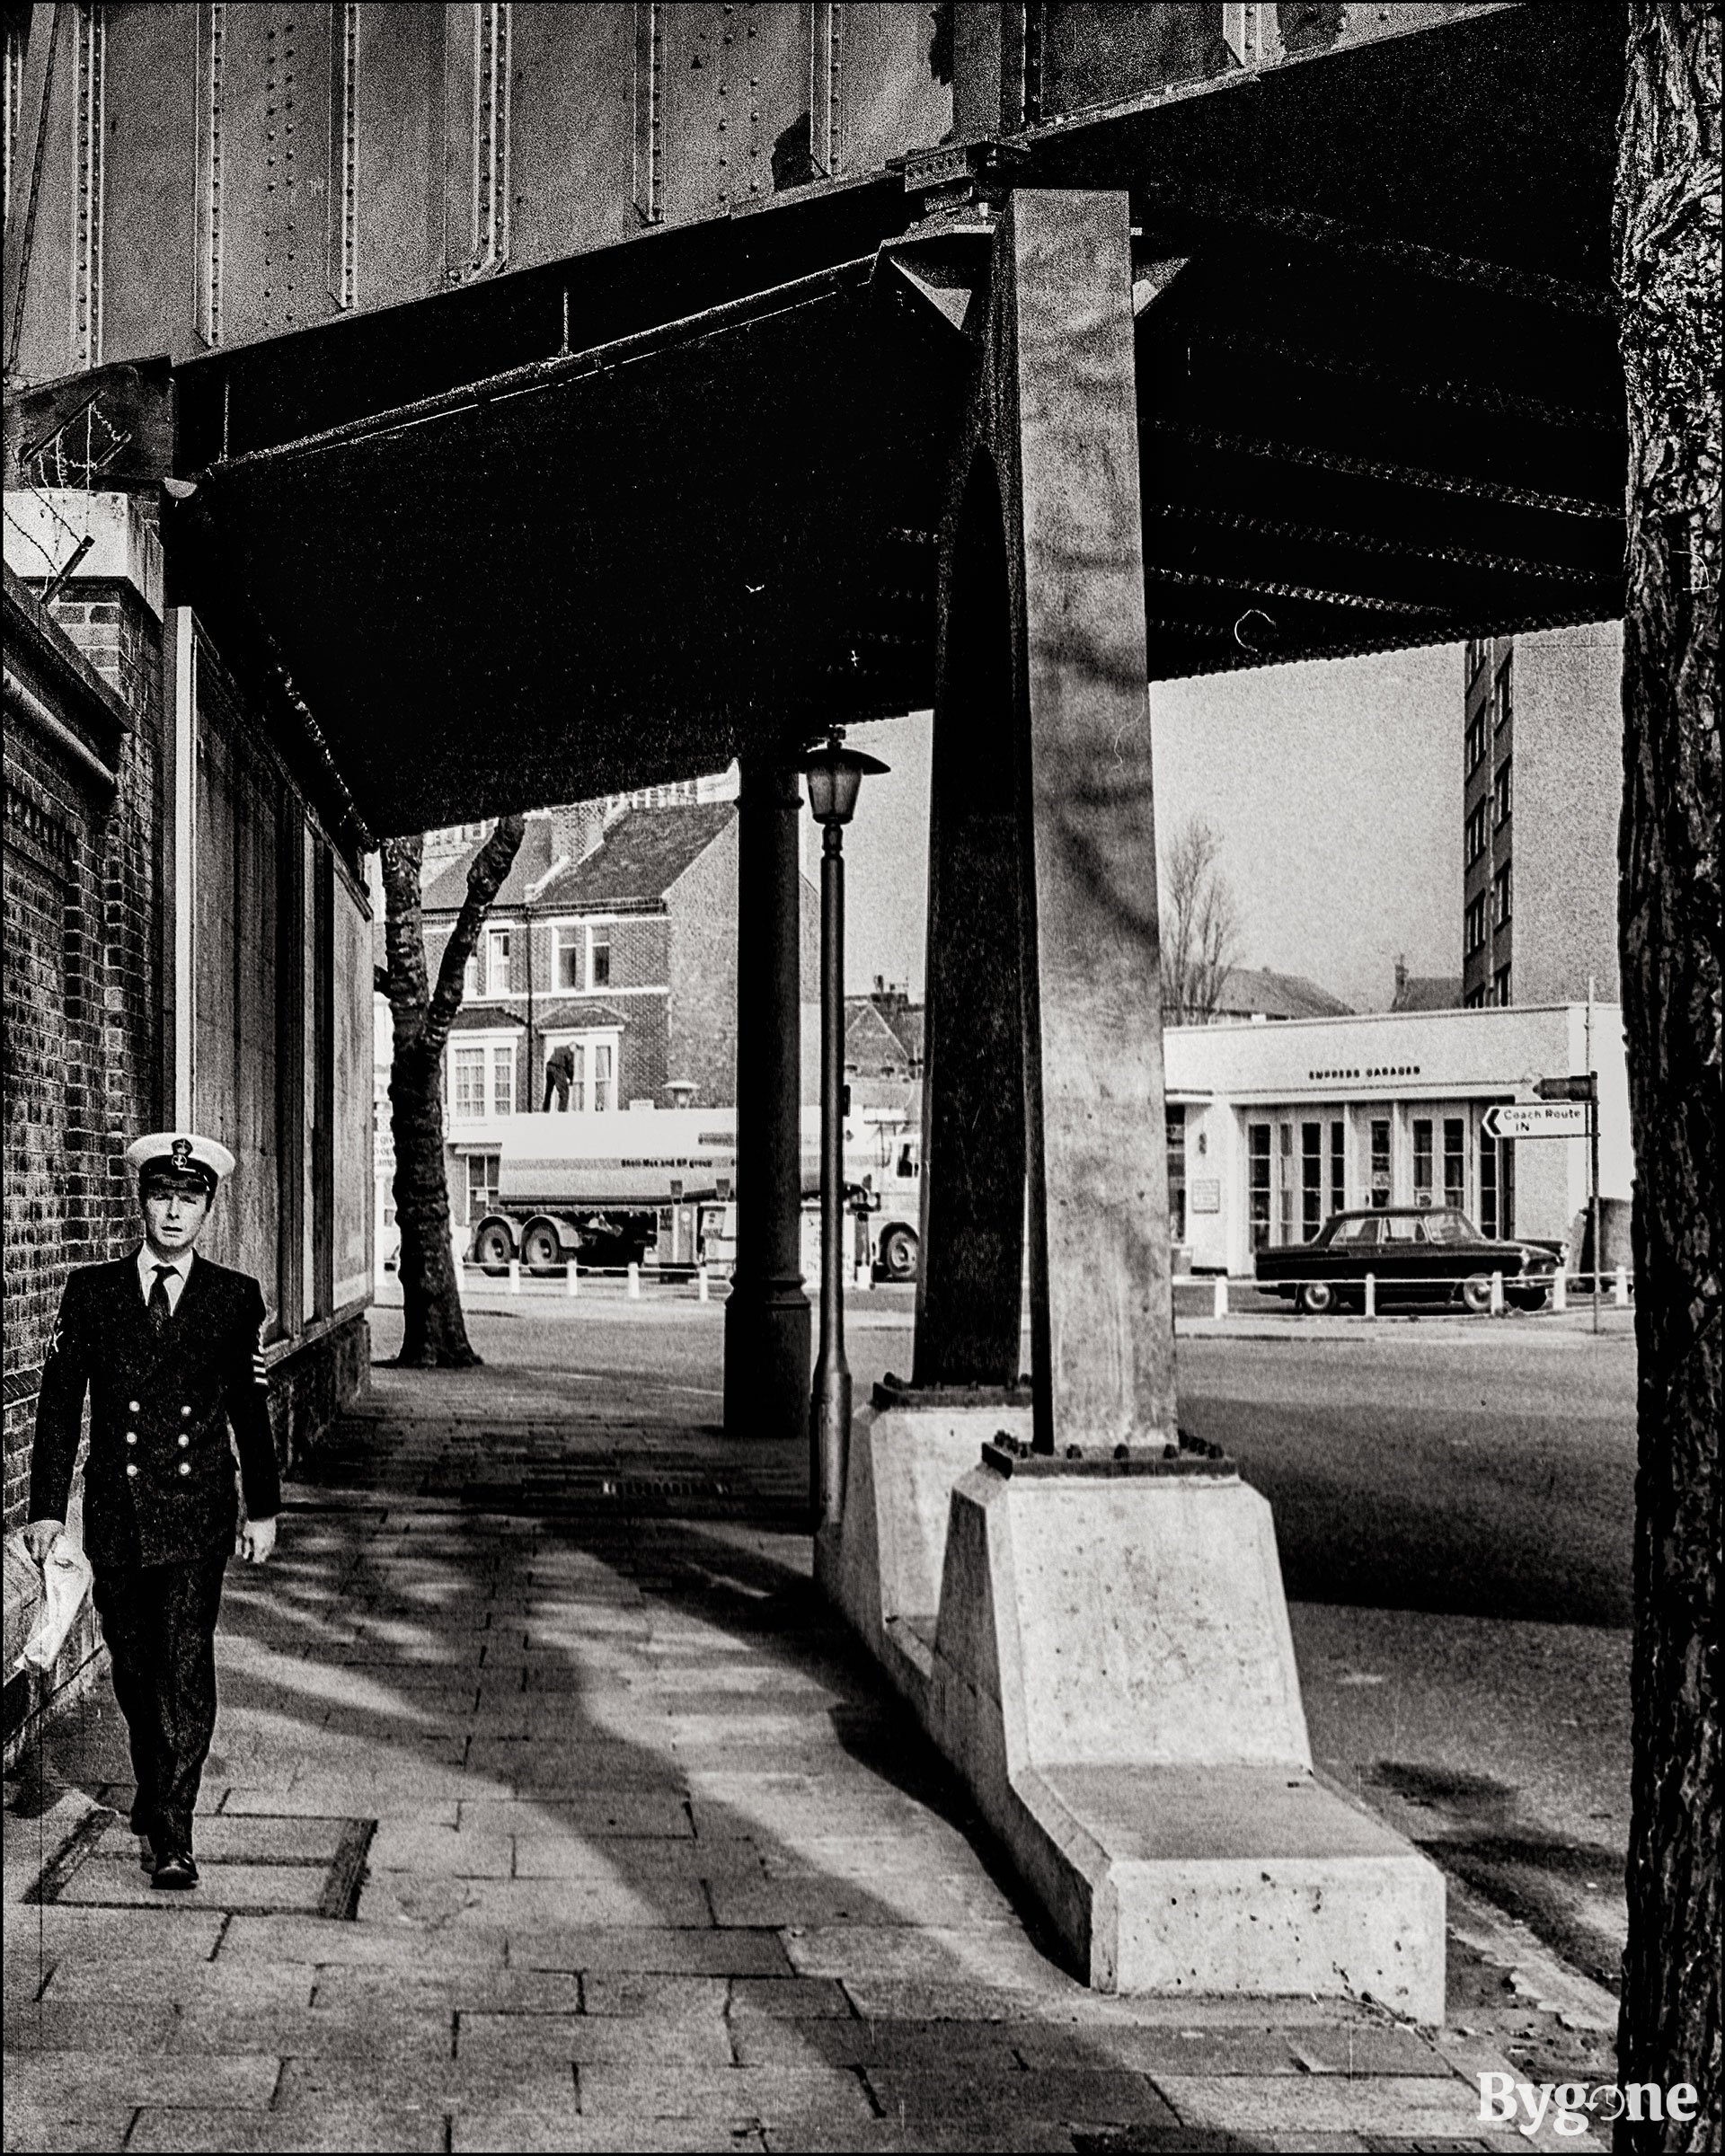 Street view from under an overhead railway bridge. There is an unknown man walking towards the camera on the left hand side of the frame, he is dressed in an old naval uniform. To the left there is a big pillar fixed into a stone plinth in the pavement. In the background there is a lorry and a car parked outside of a garage called Empress Garages.